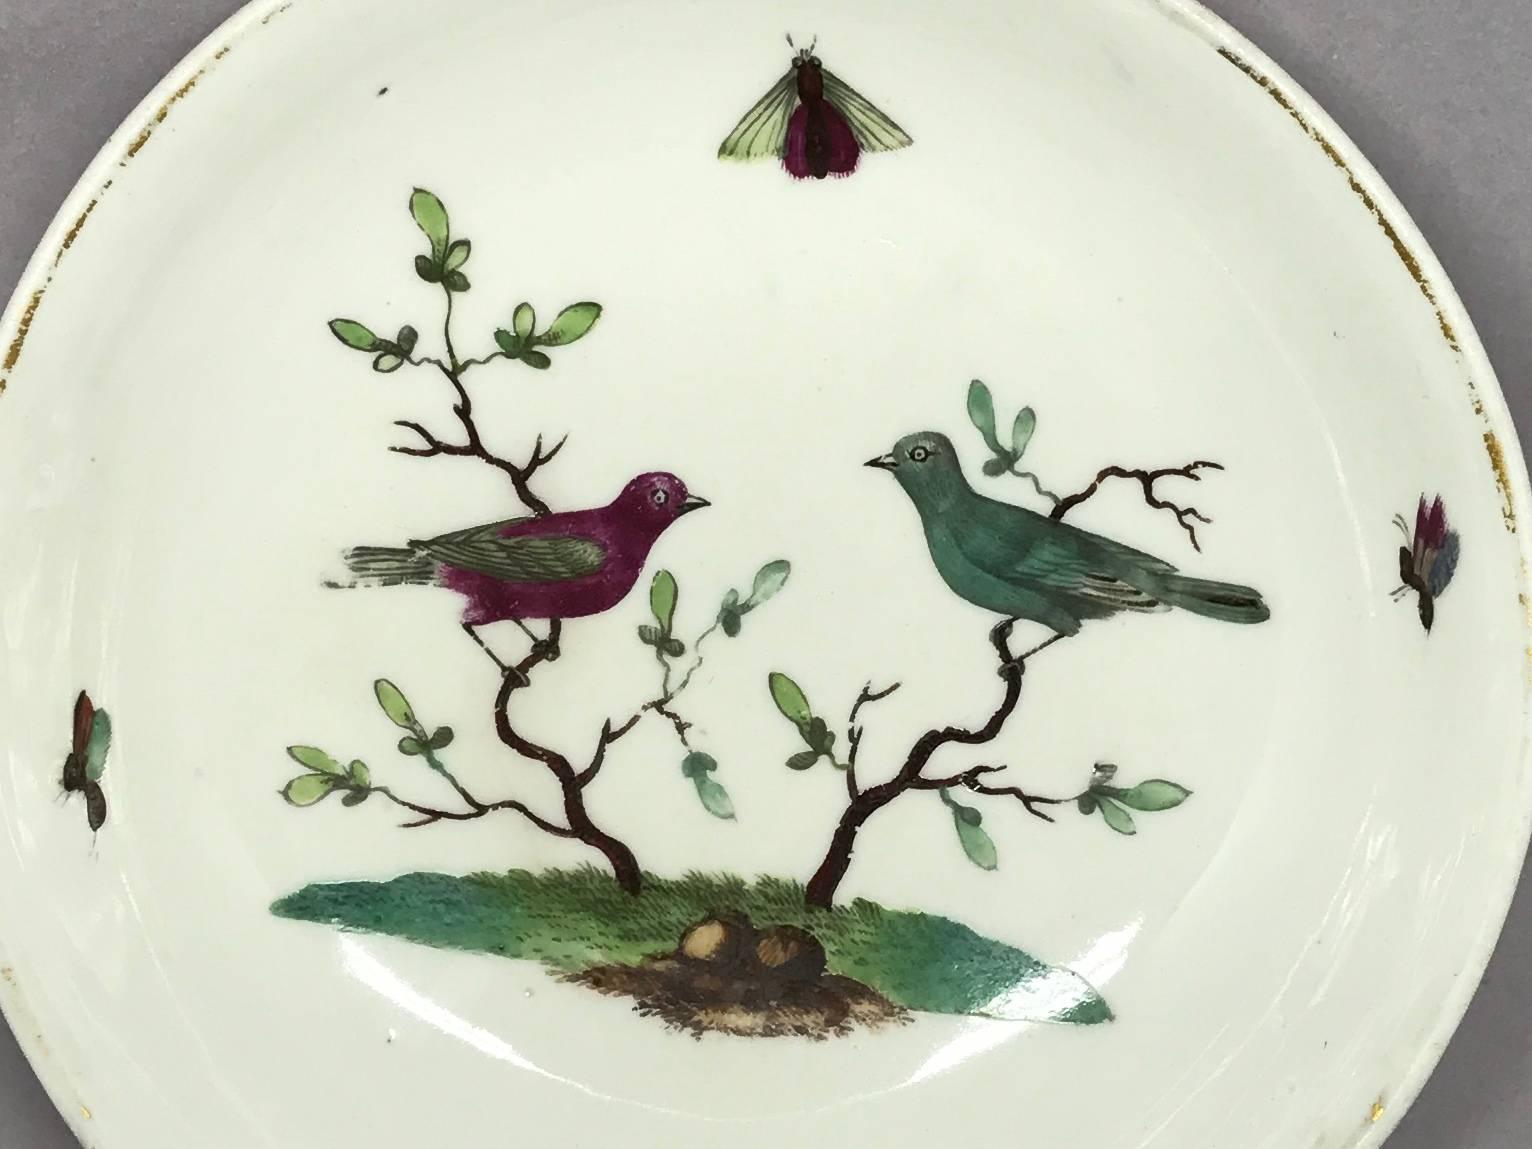 Small bird plate. Hand-painted small dish / vide-poche with birds and insects in a landscape with soft gold rim. Underglaze blue crown marks for Ludwigsburg. Germany, late 18th century.
Dimensions: 5.25